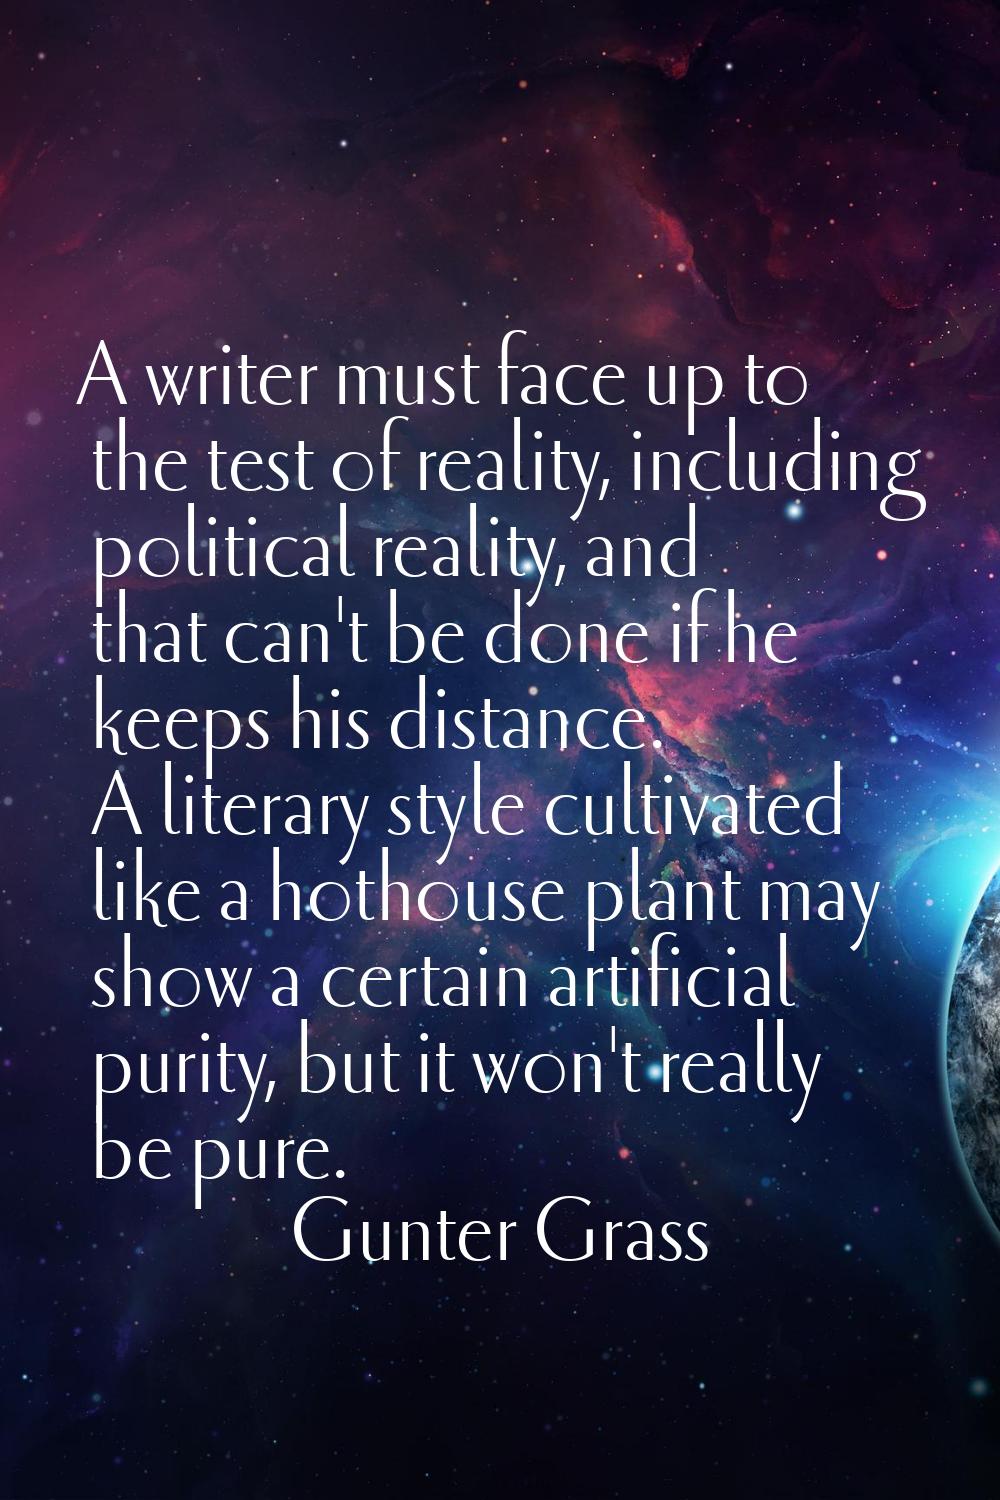 A writer must face up to the test of reality, including political reality, and that can't be done i